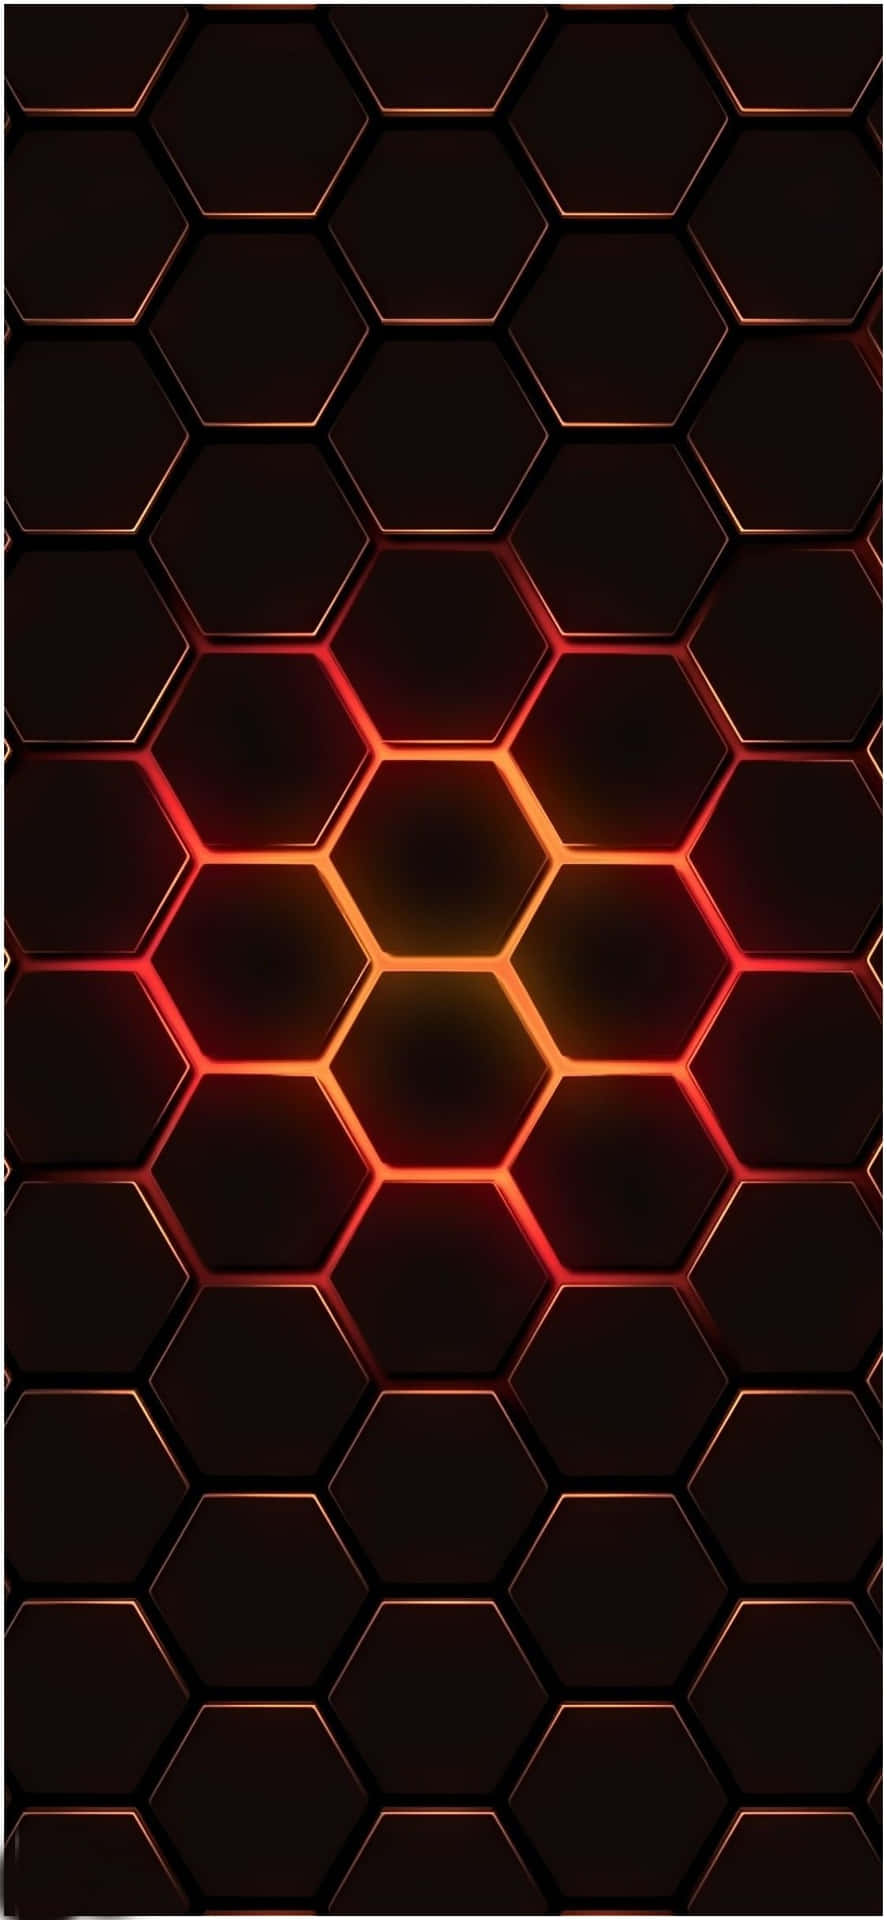 Glowing Red And Black Hexagons Designer Iphone Wallpaper